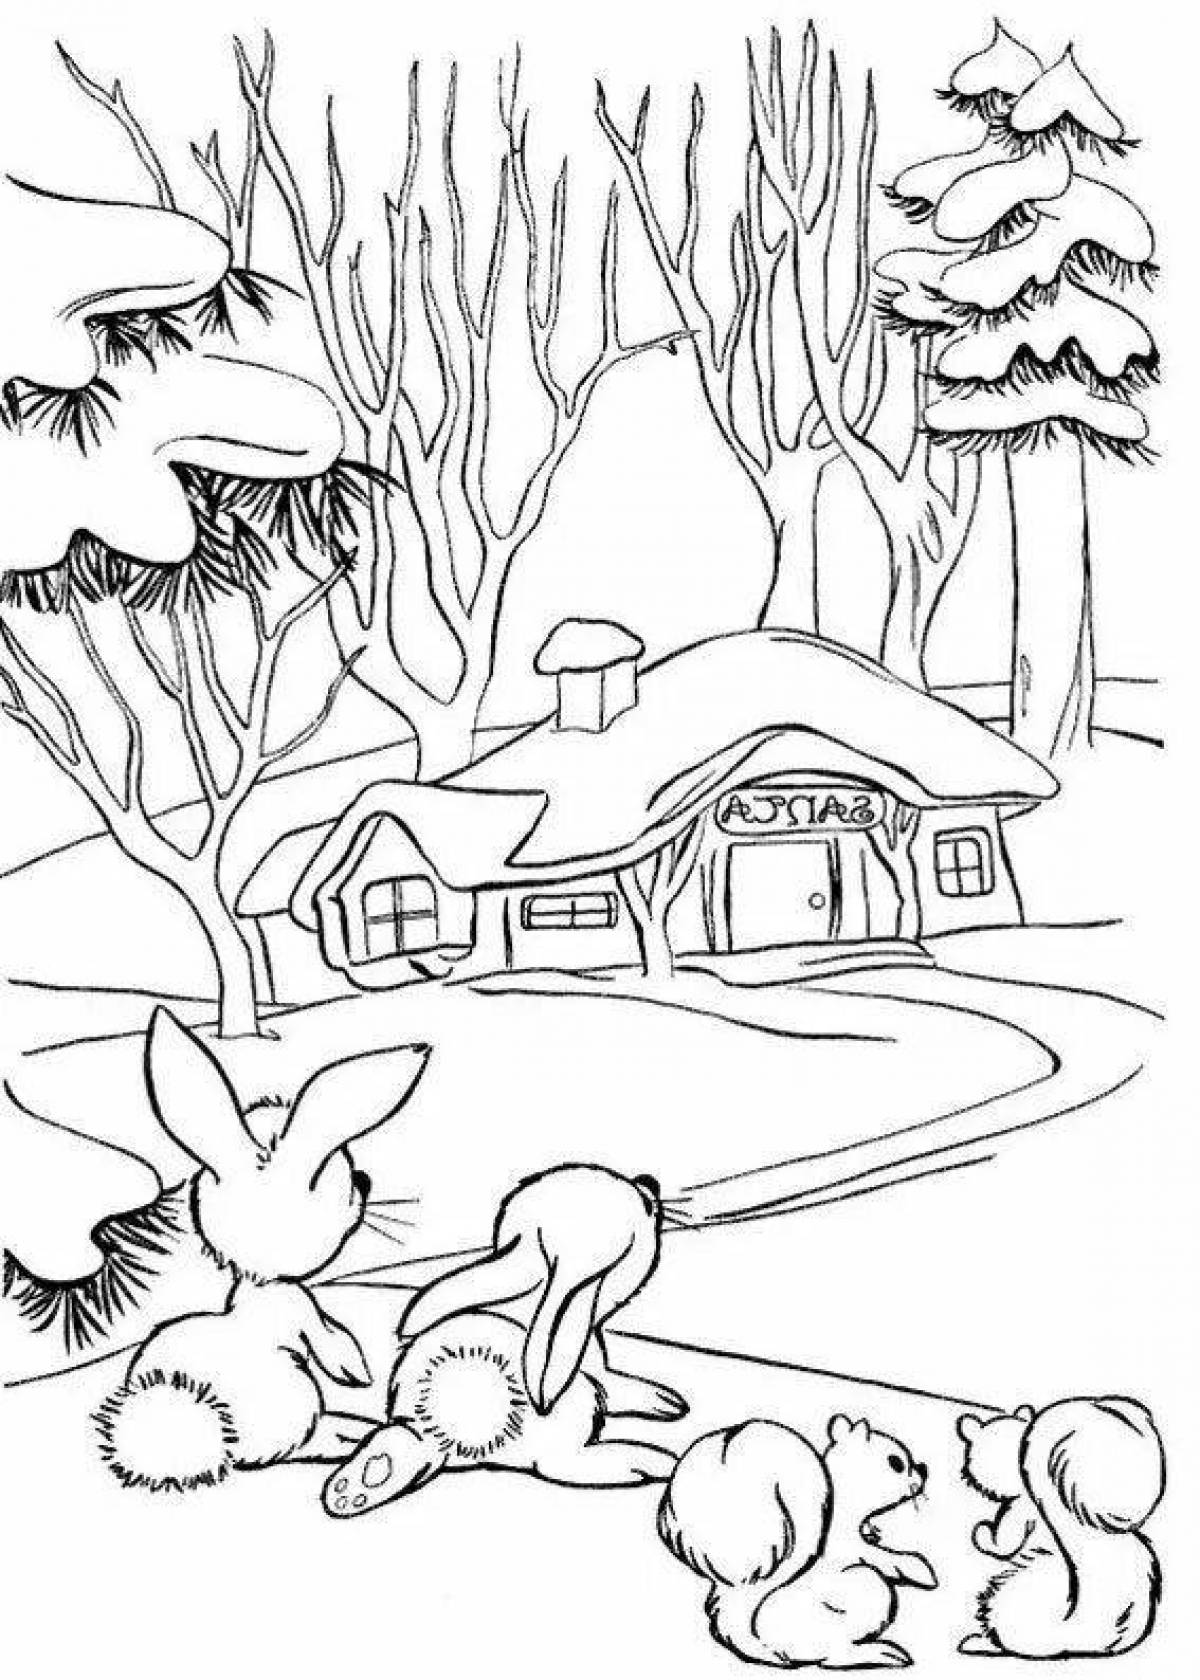 Charming winter nature coloring book